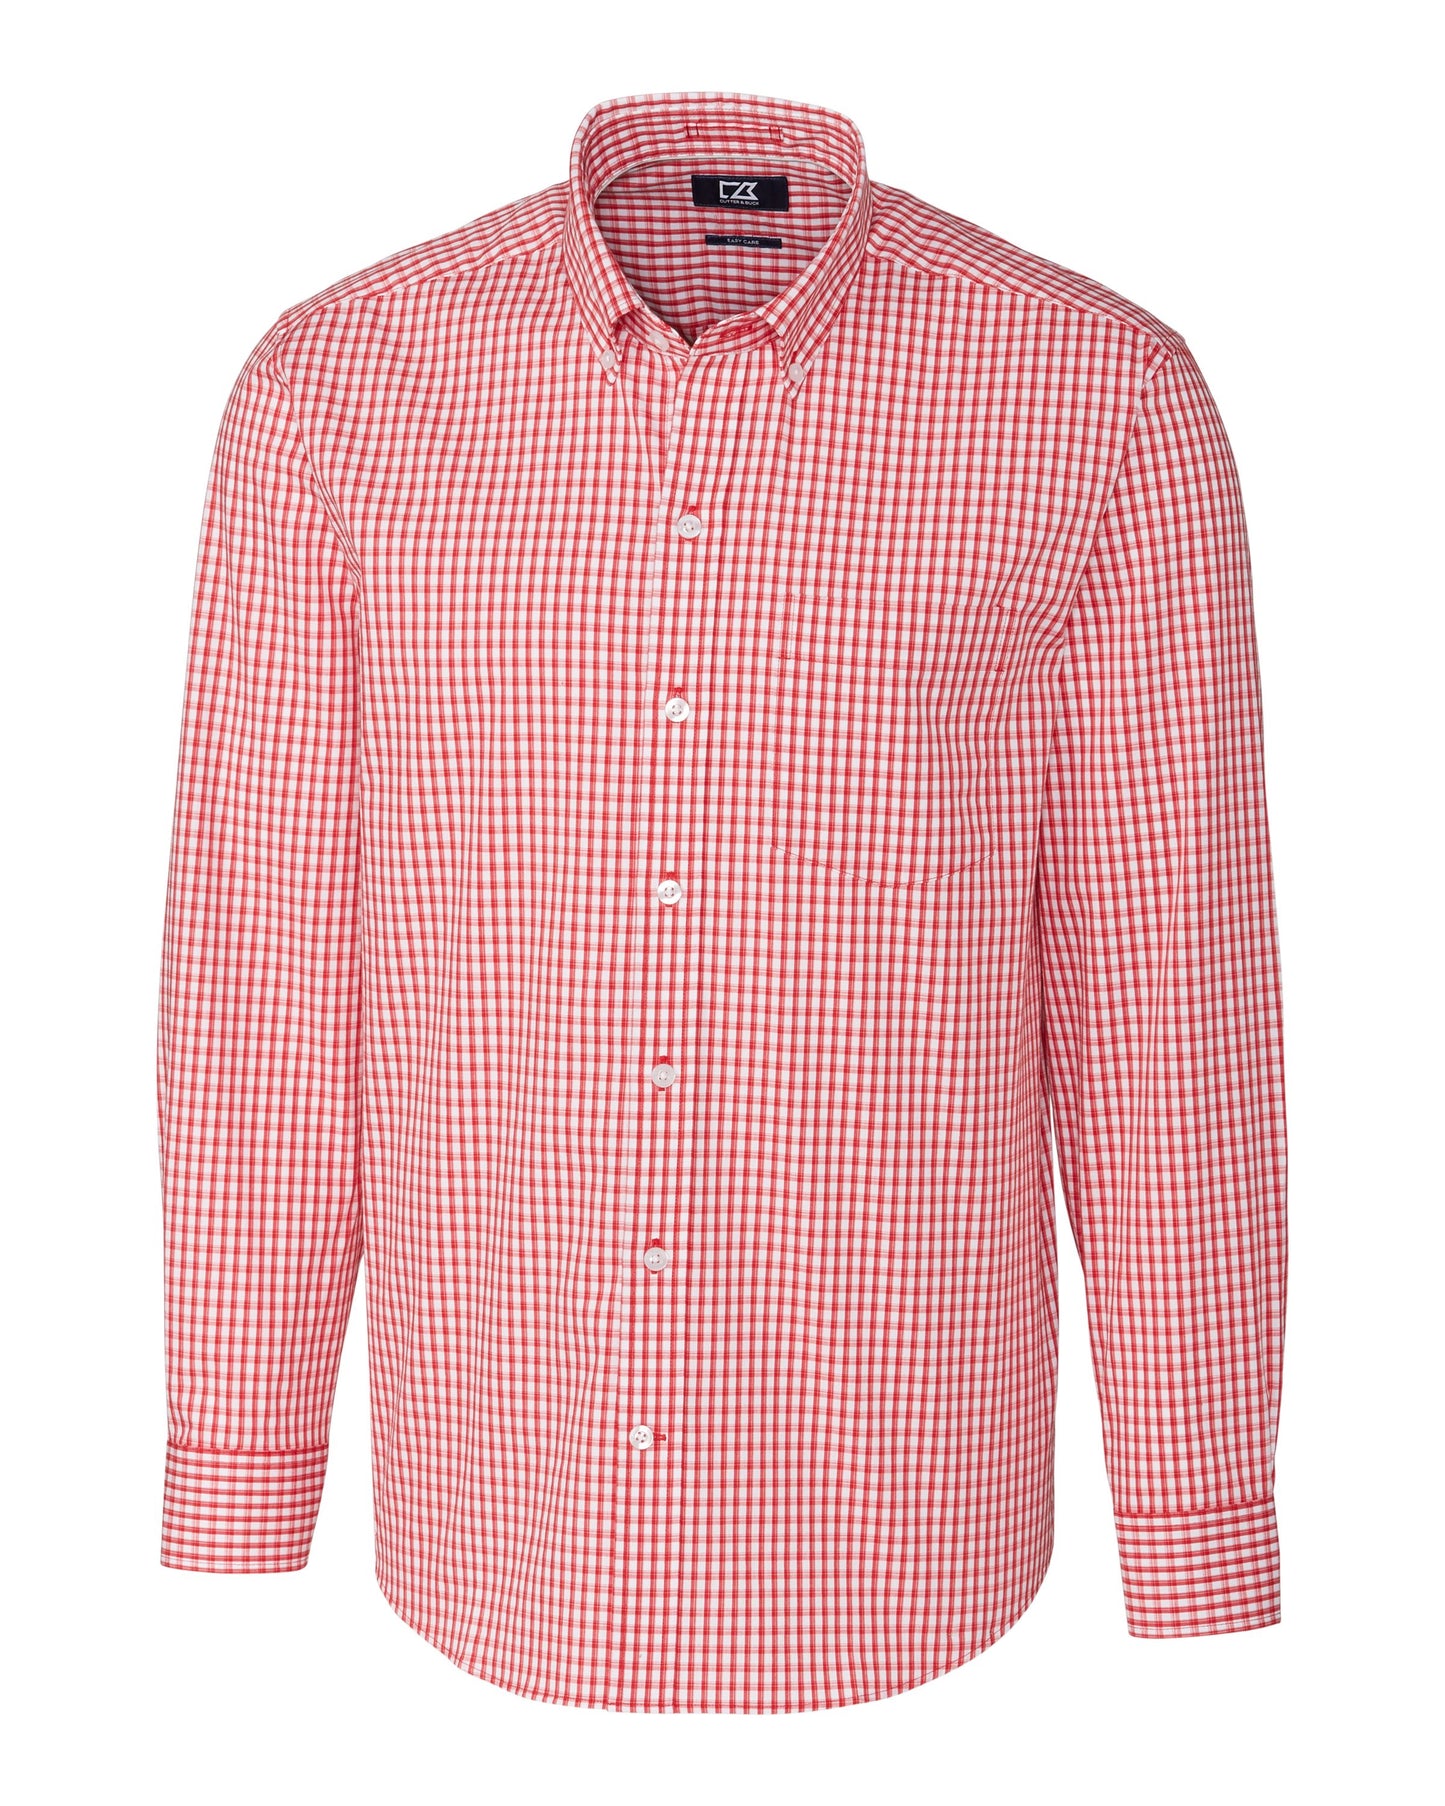 Cutter & Buck Easy Care Stretch Gingham Dress Shirt Red